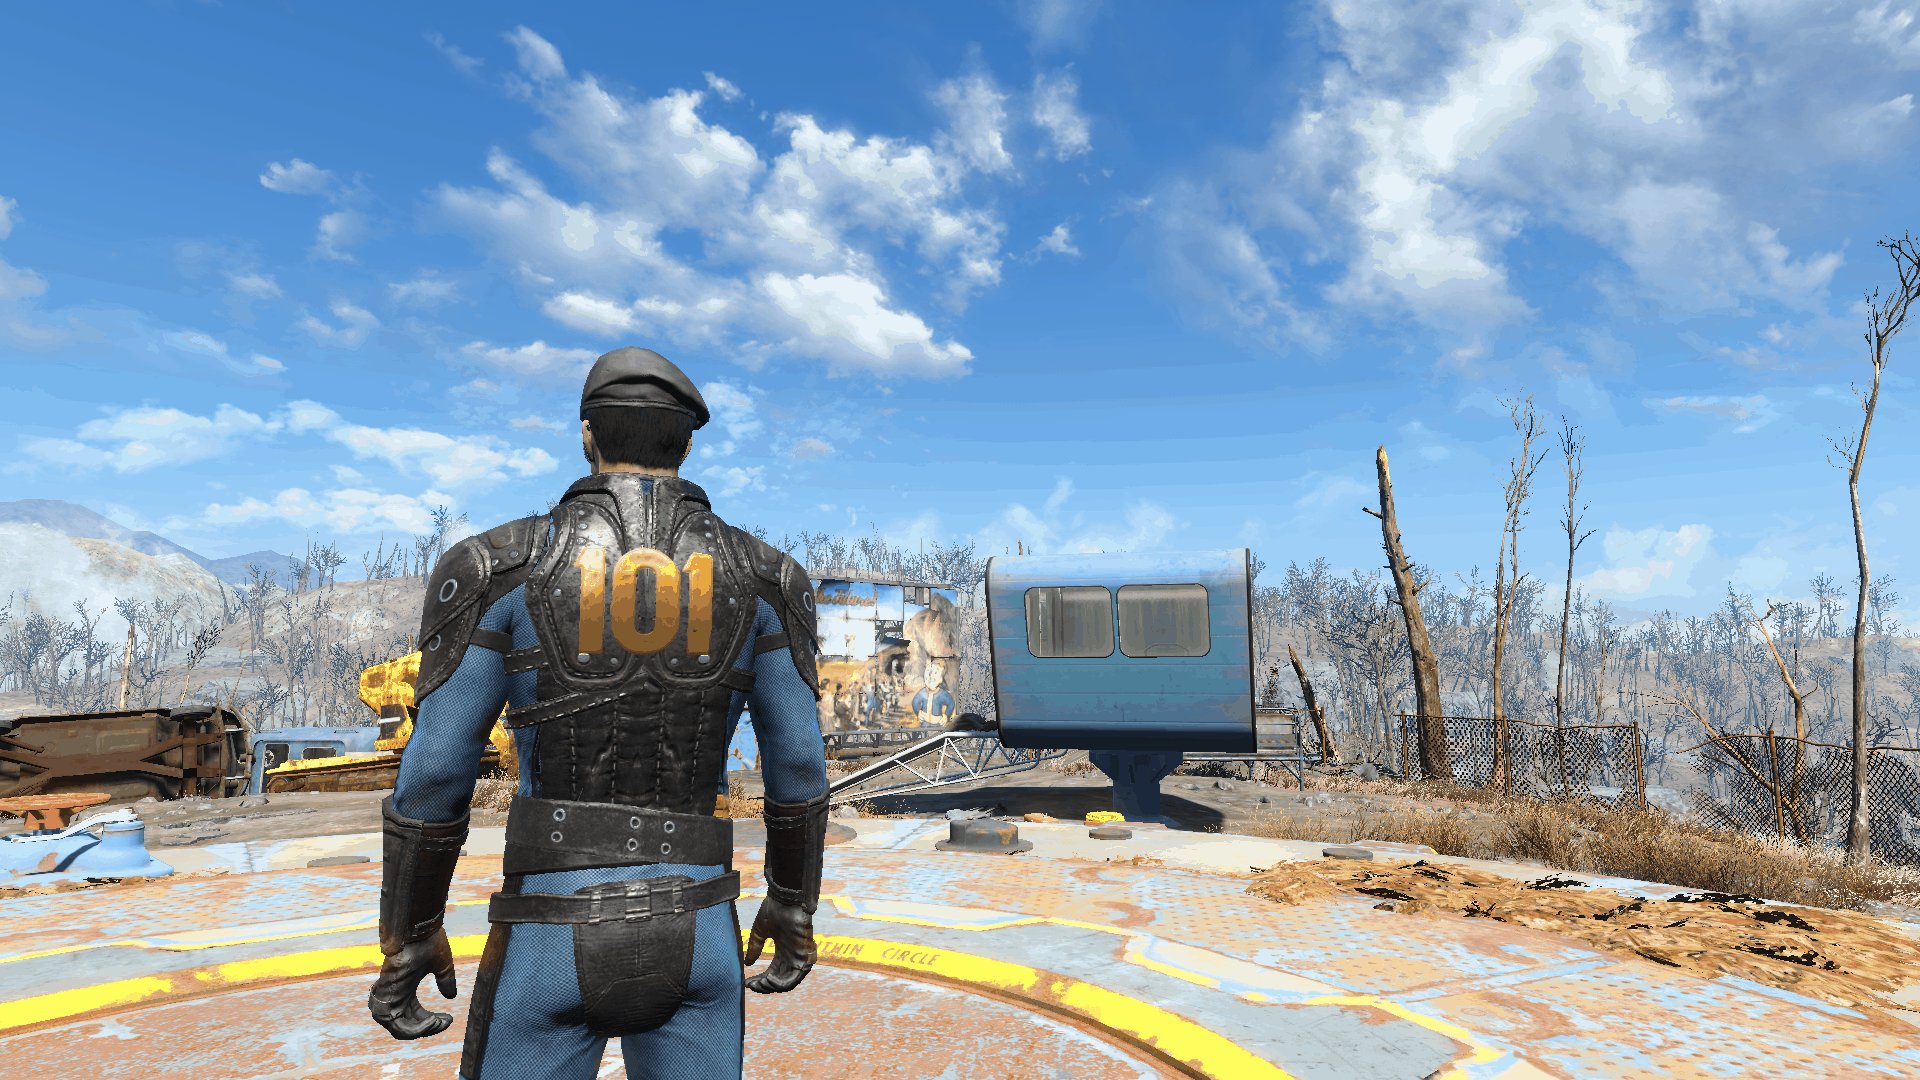 Build your own vault fallout 4 фото 105